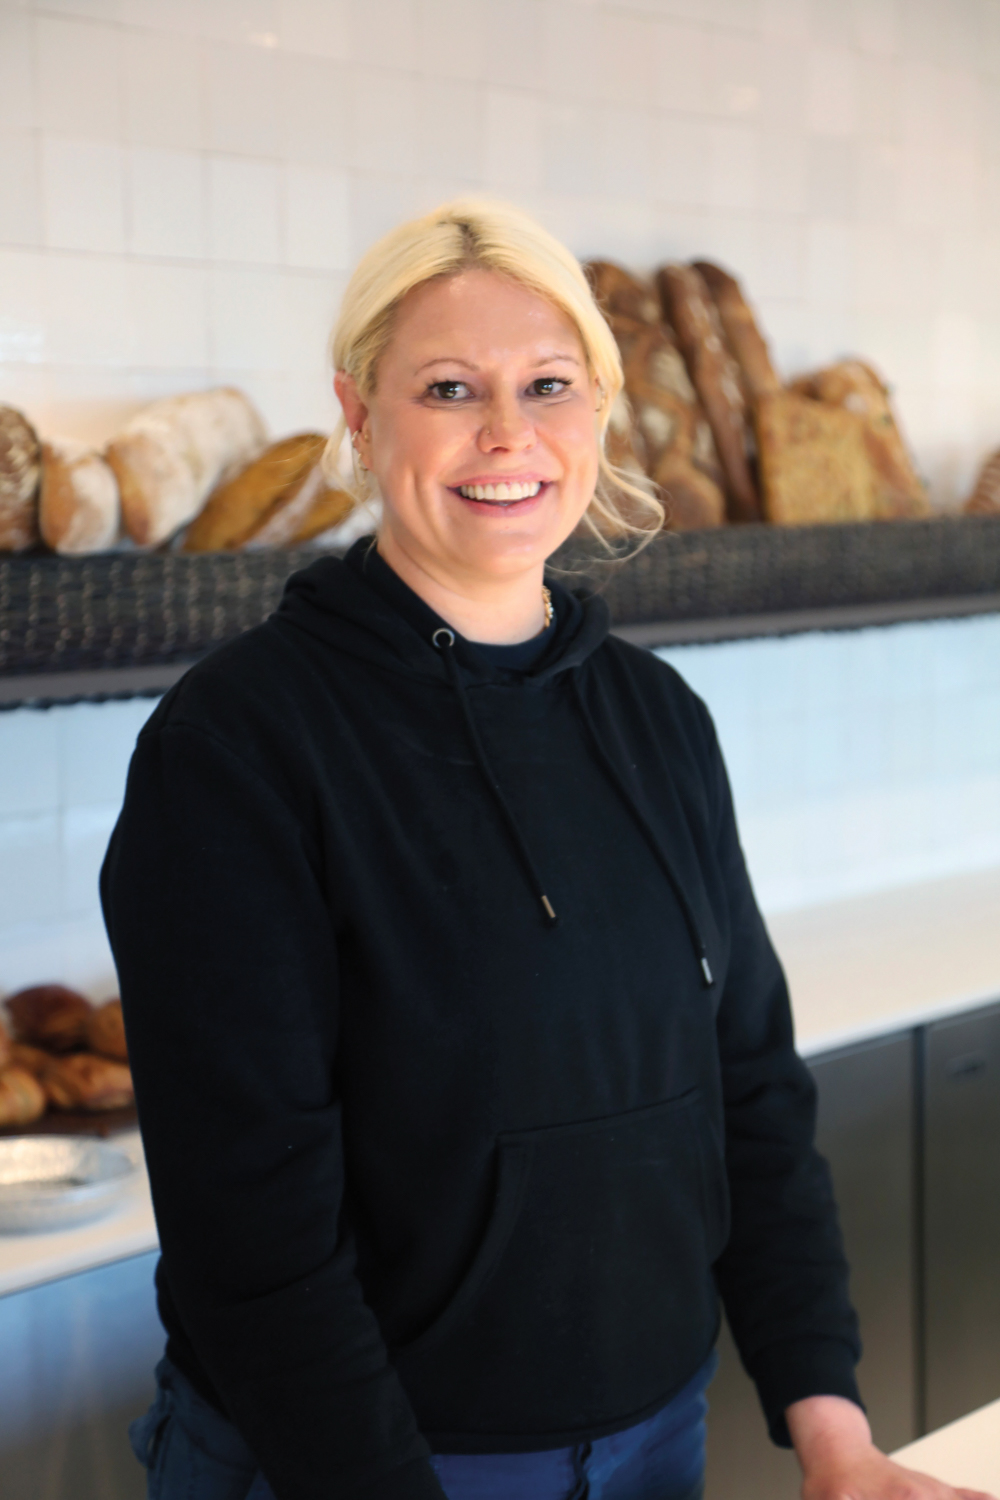 Carissa Waechter, owner and chef of Sag Harbor bakery